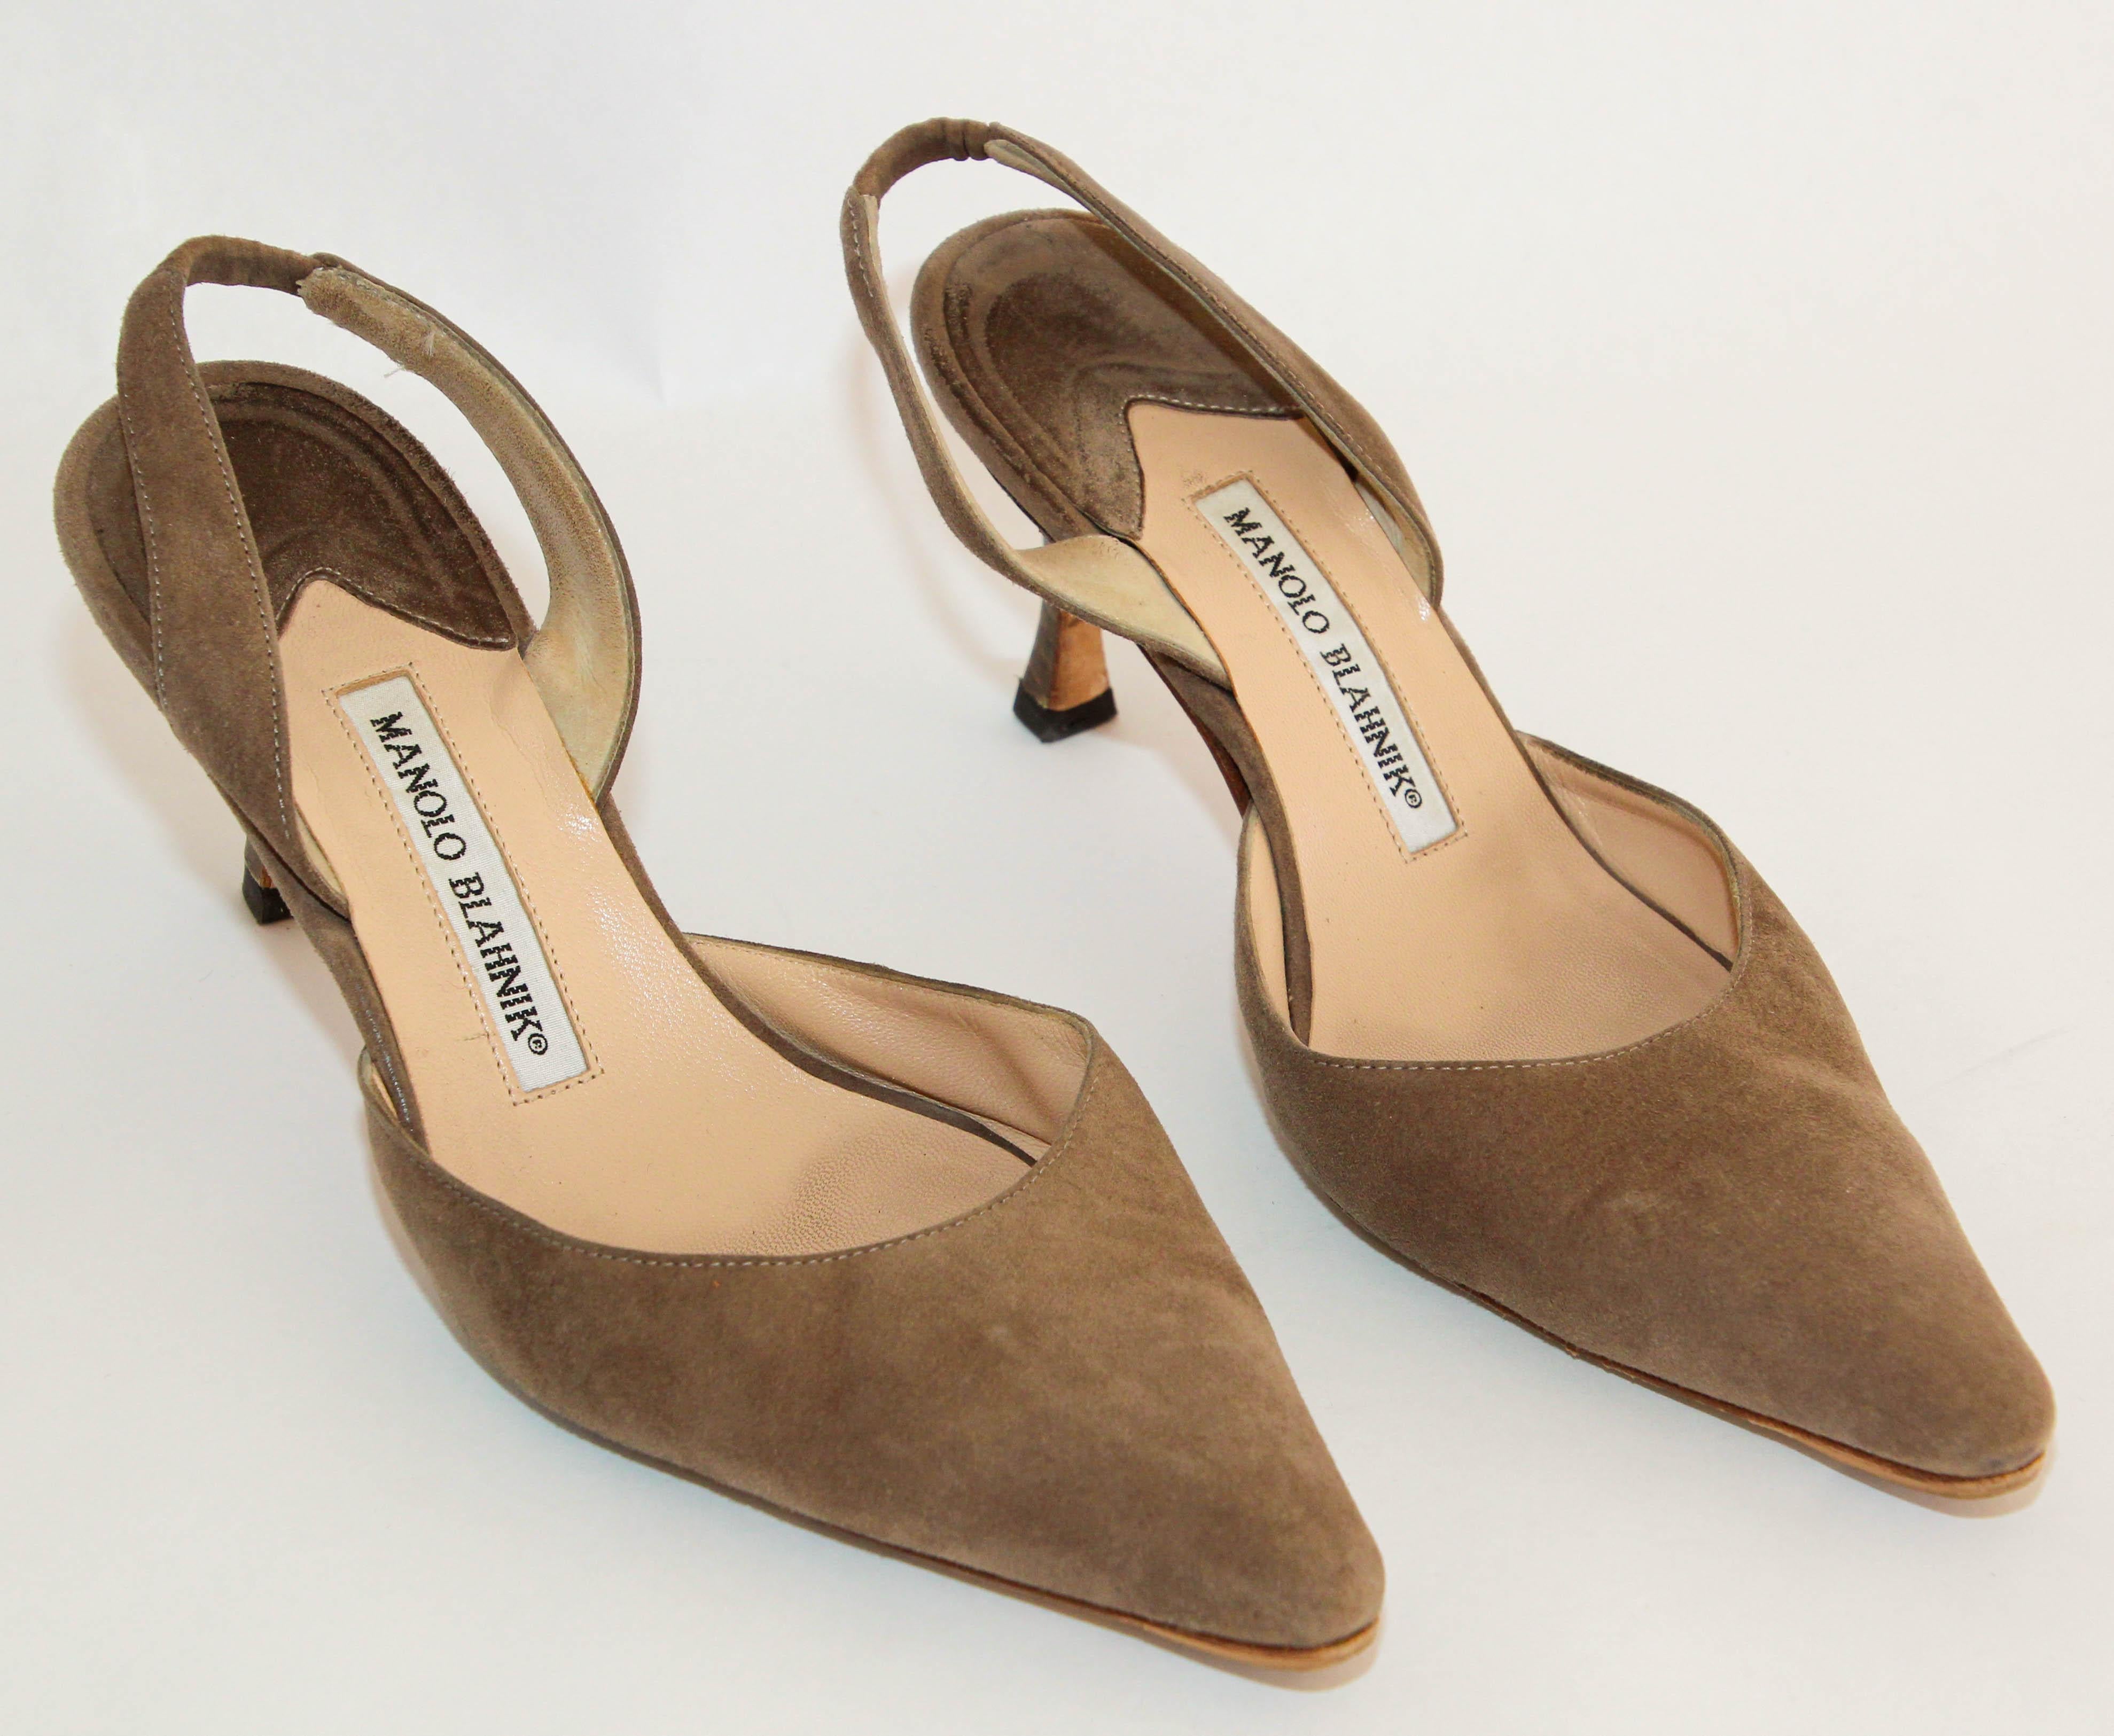 MANOLO BLAHNIK Carolyne Brown Suede Mid-heel Slingback Pump In Brown Pointed Toe Slingback Sandals.
Size 37.5 EU - 7.5 US.
These sandals are beautifully crafted in suede with pointed toes and slingback straps. 
They are styled well with 3 inches